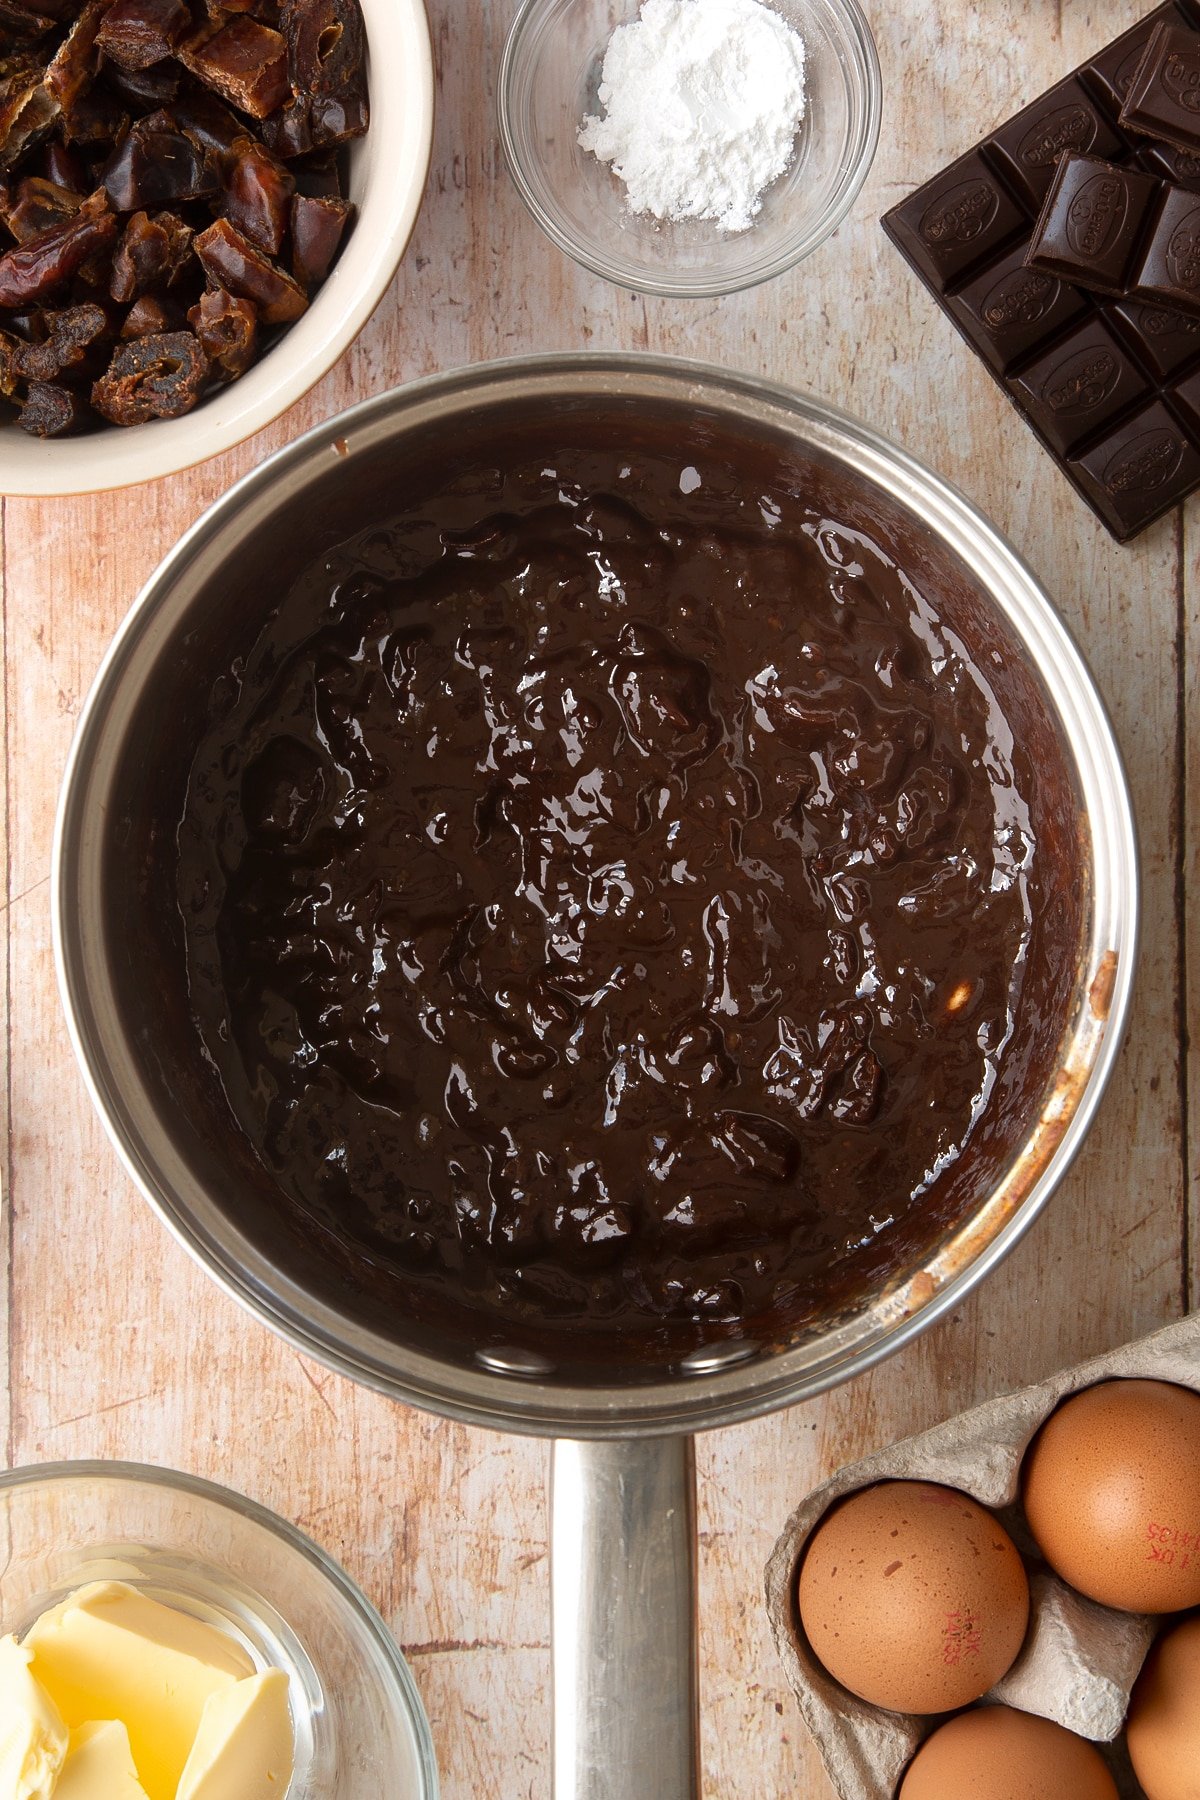 A sauce pan containing chopped dates melted together with butter, dark chocolate and sugar. Ingredients to make whole grain brownies surround the pan.